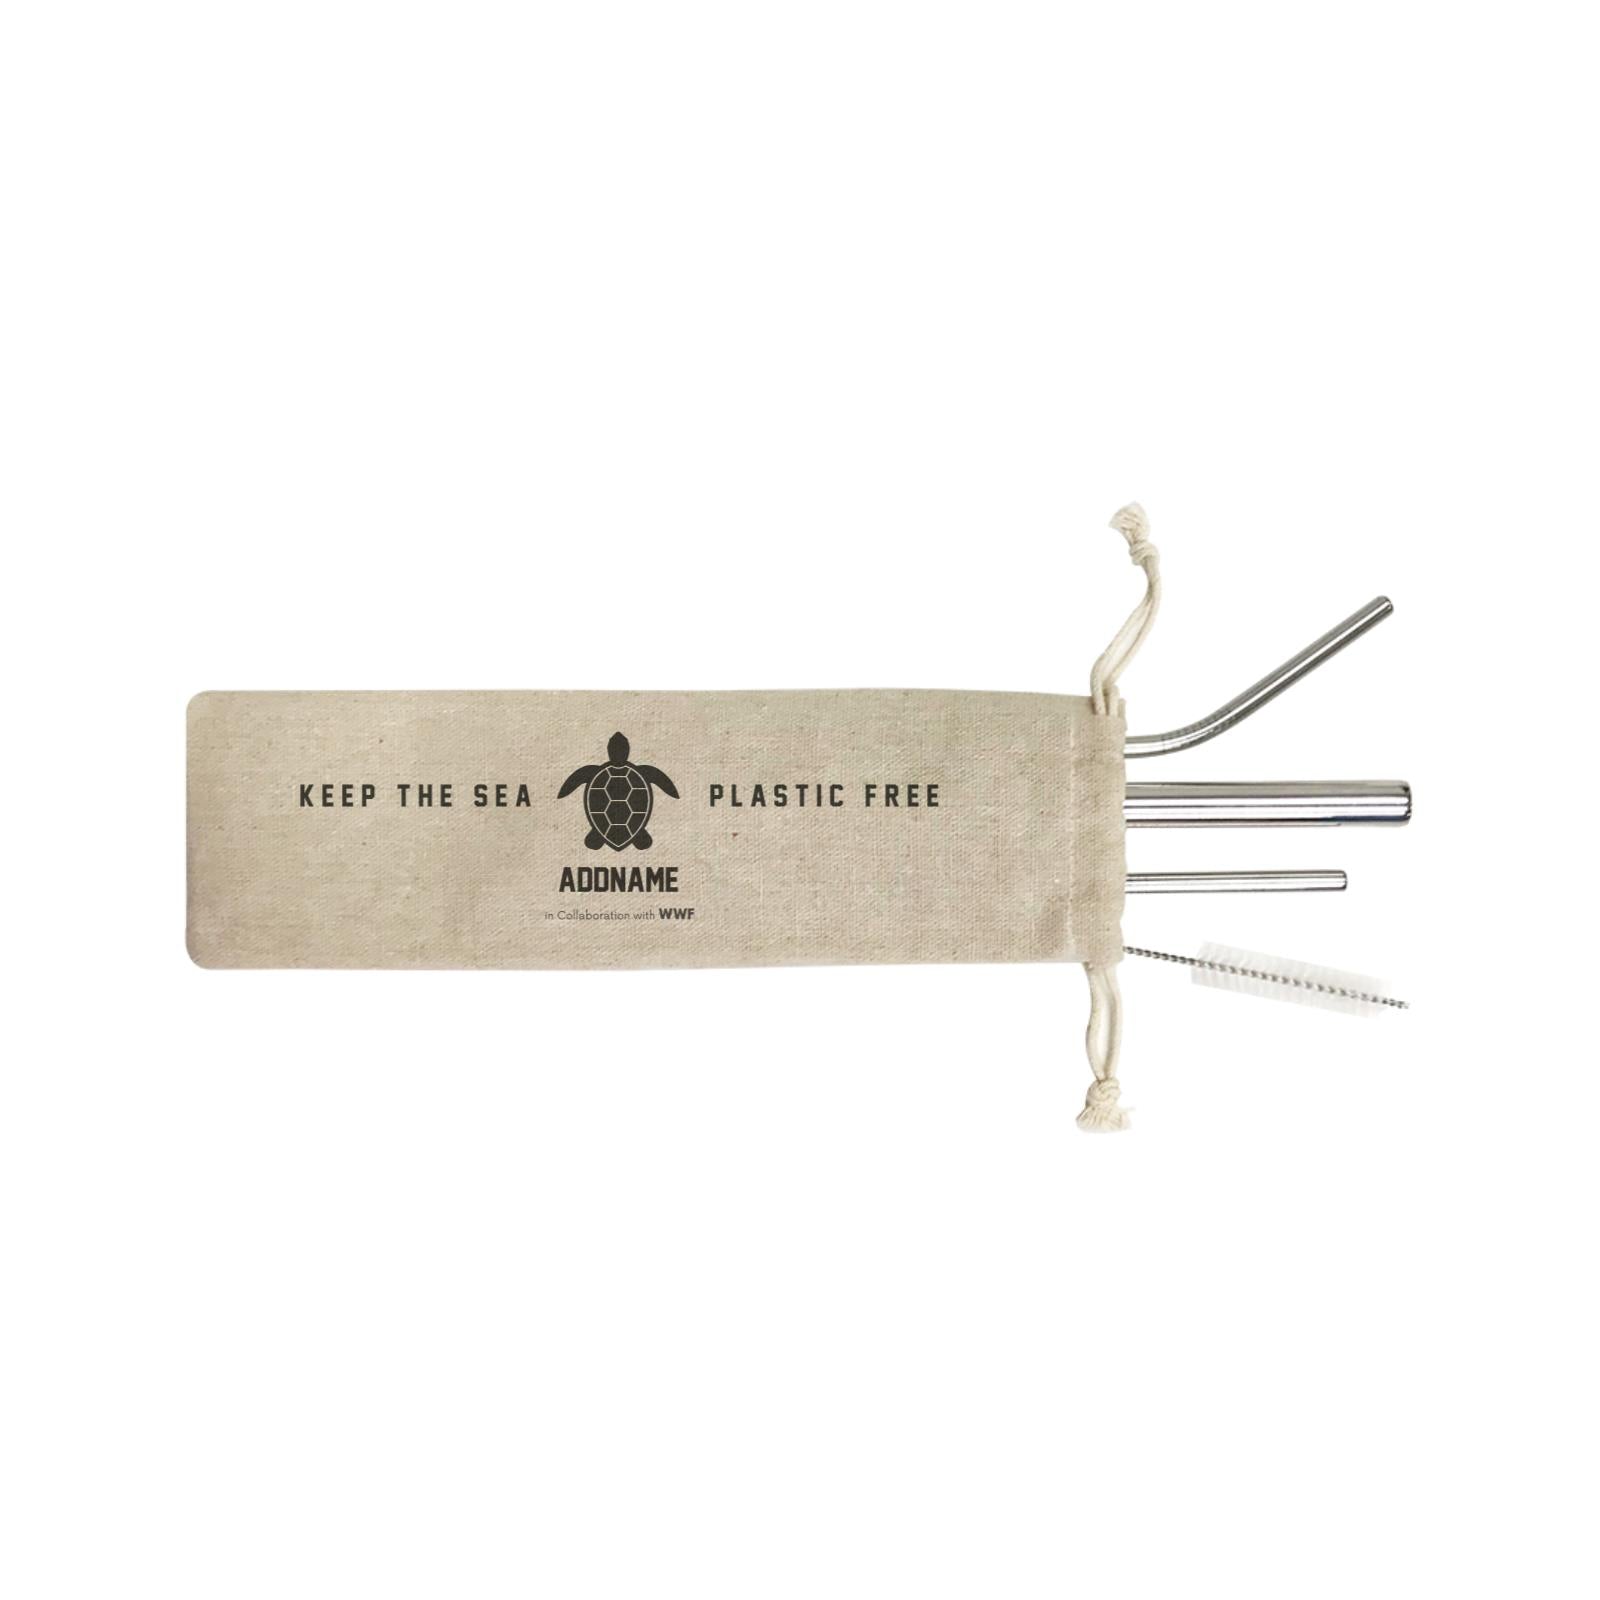 Please Keep The Sea Plastic Free Turtle Monochrome Addname SB 4-In-1 Stainless Steel Straw Set in Satchel